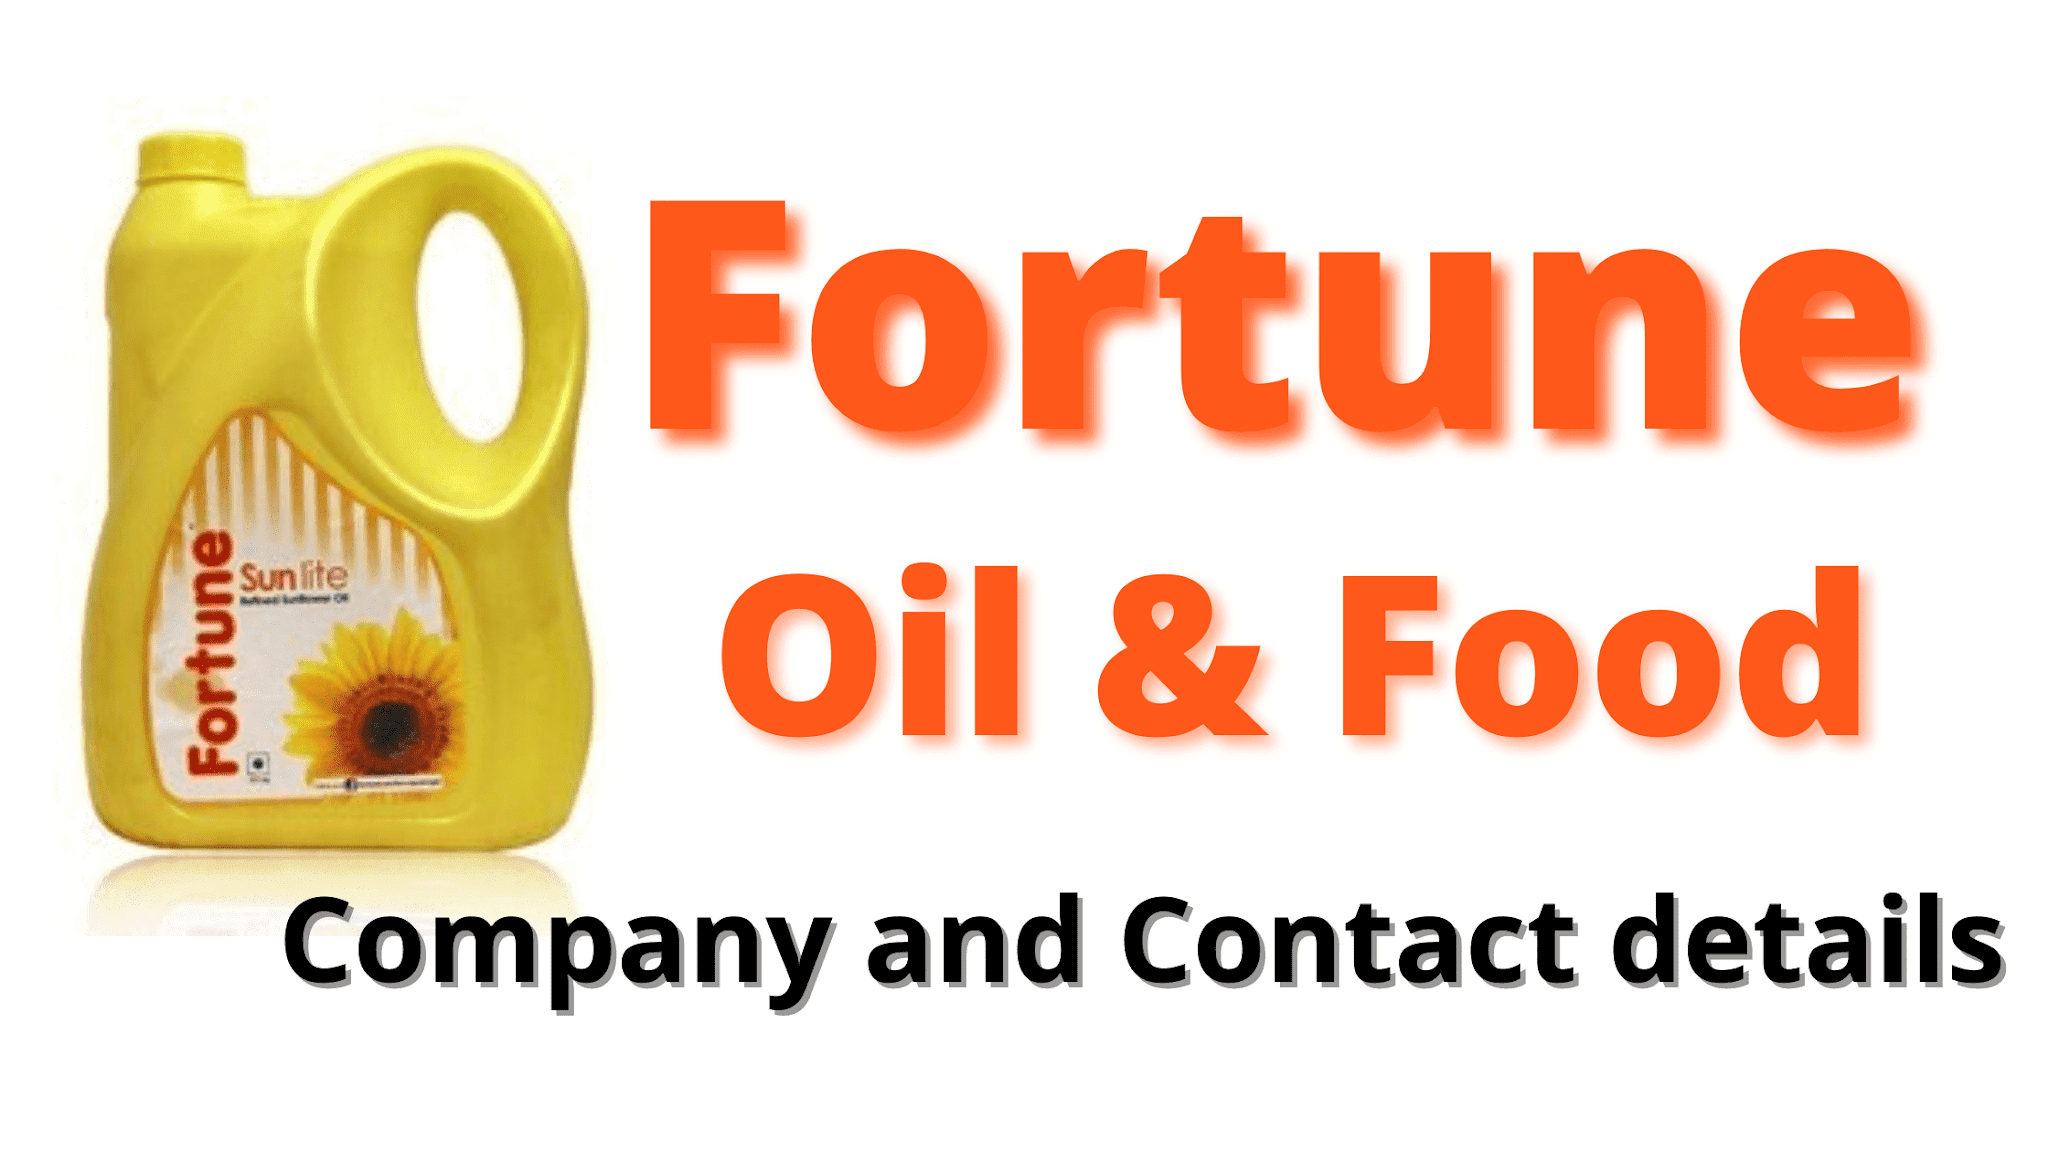 Fortune Oil Customer Care Company Details And Contact Number